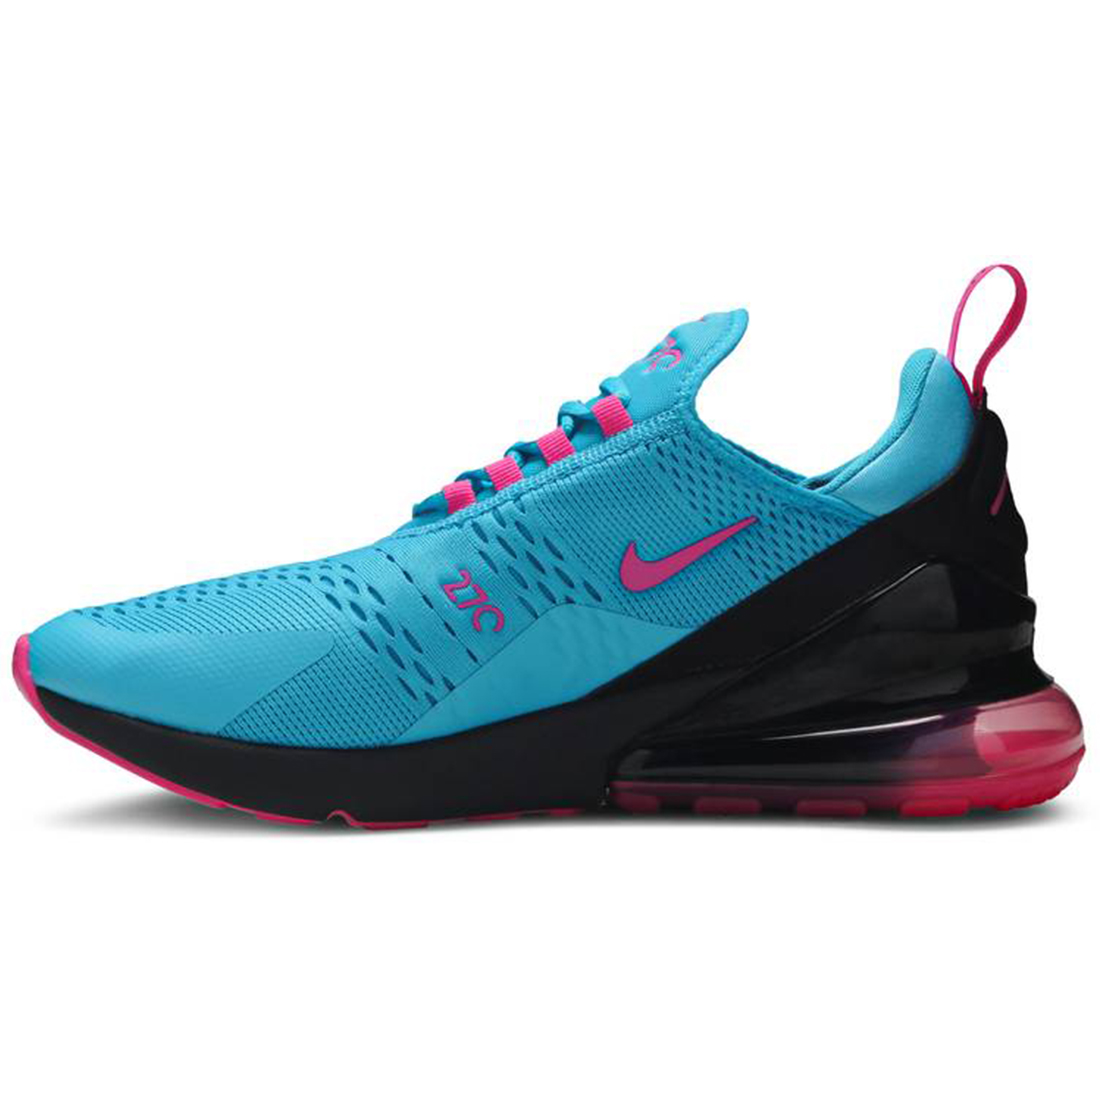 Air Max 270 Series nike shoes sport shoes Outlet – PK-Shoes